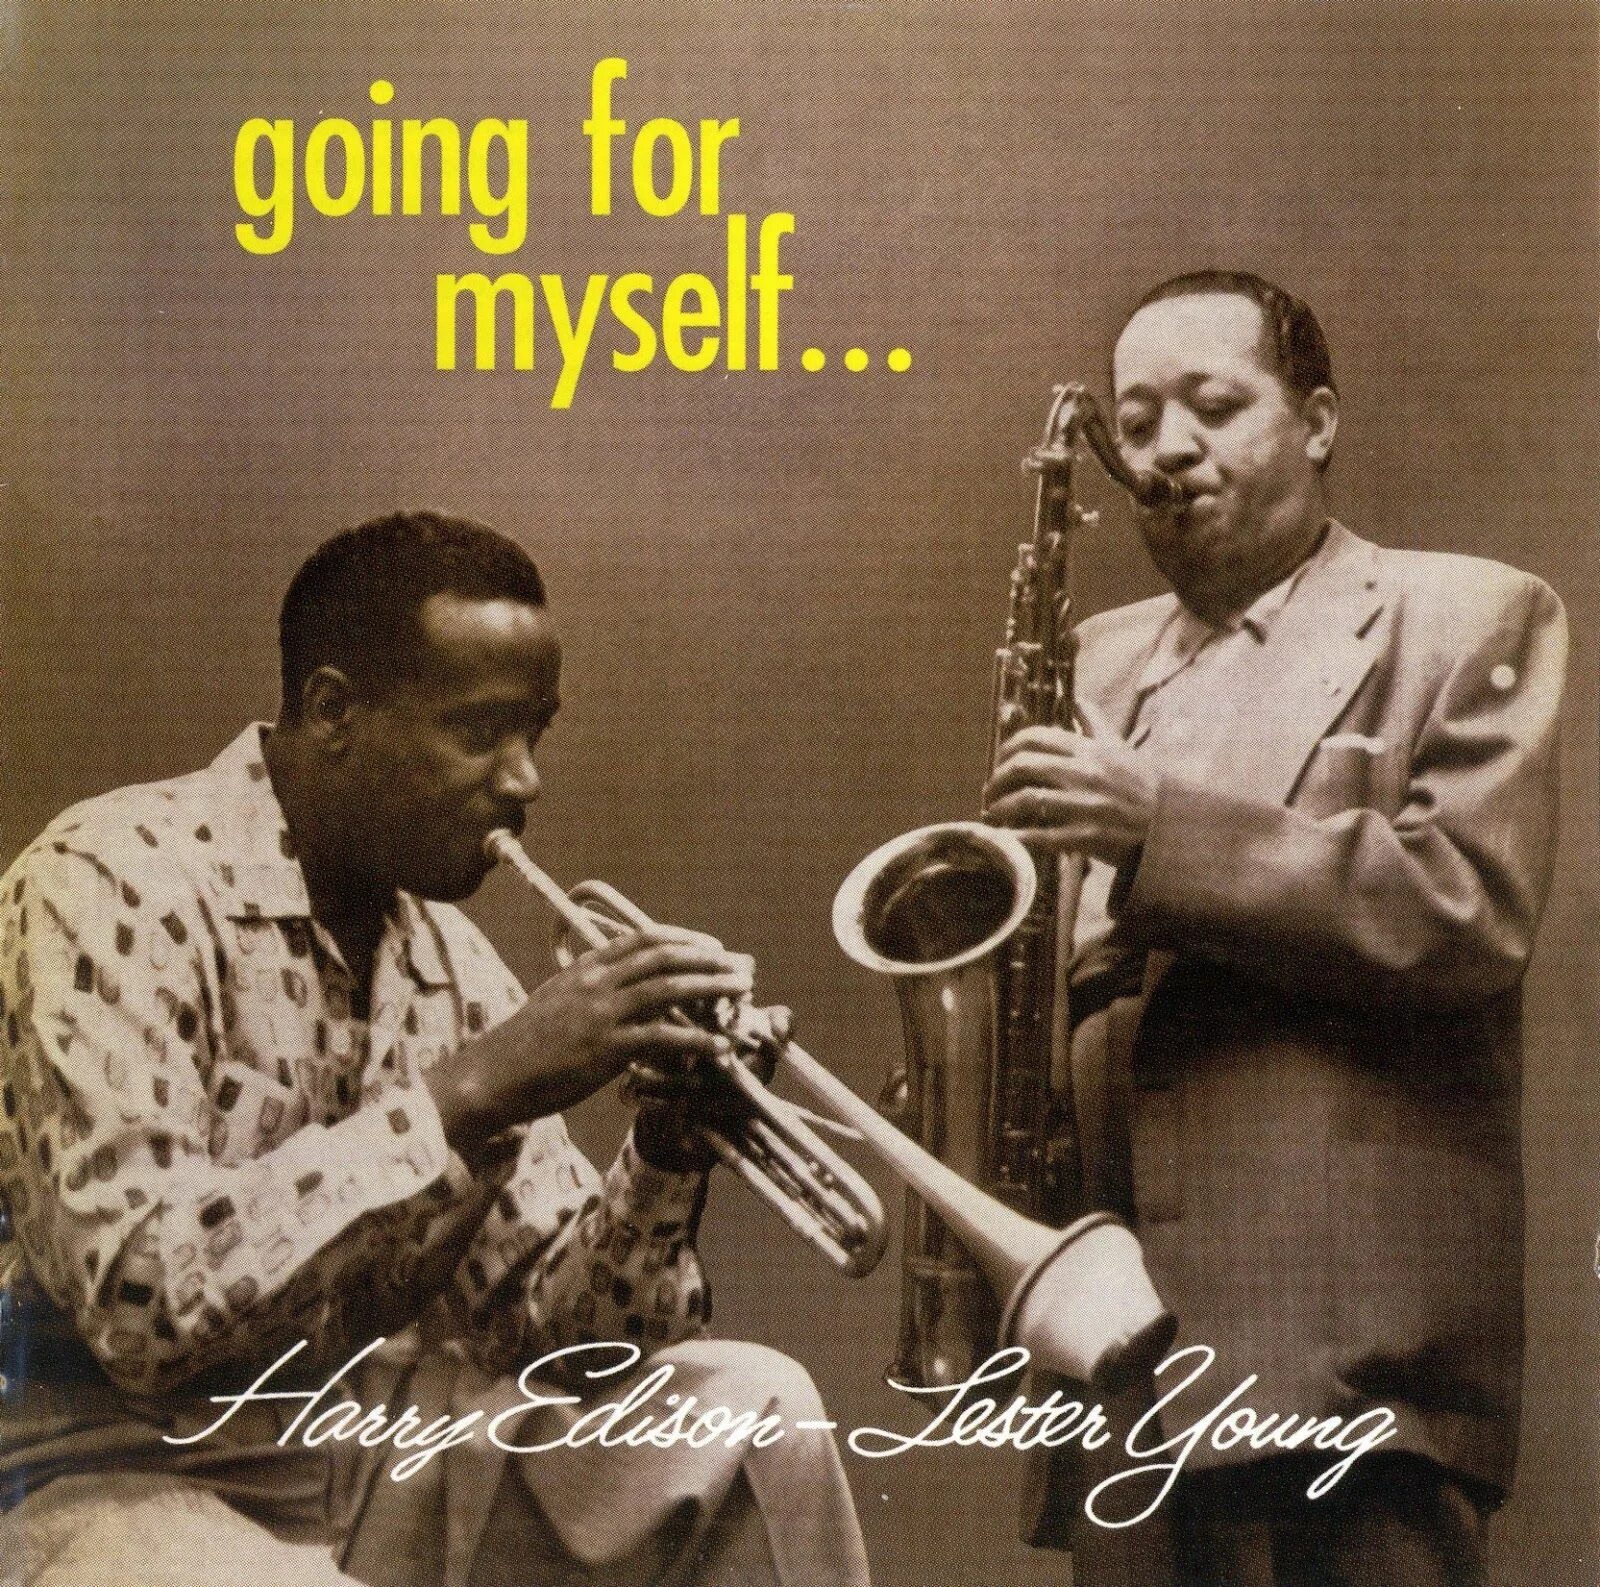 Lester young-обложки альбомов. Lester. Harry Sweets Edison for my Pals CD купить.